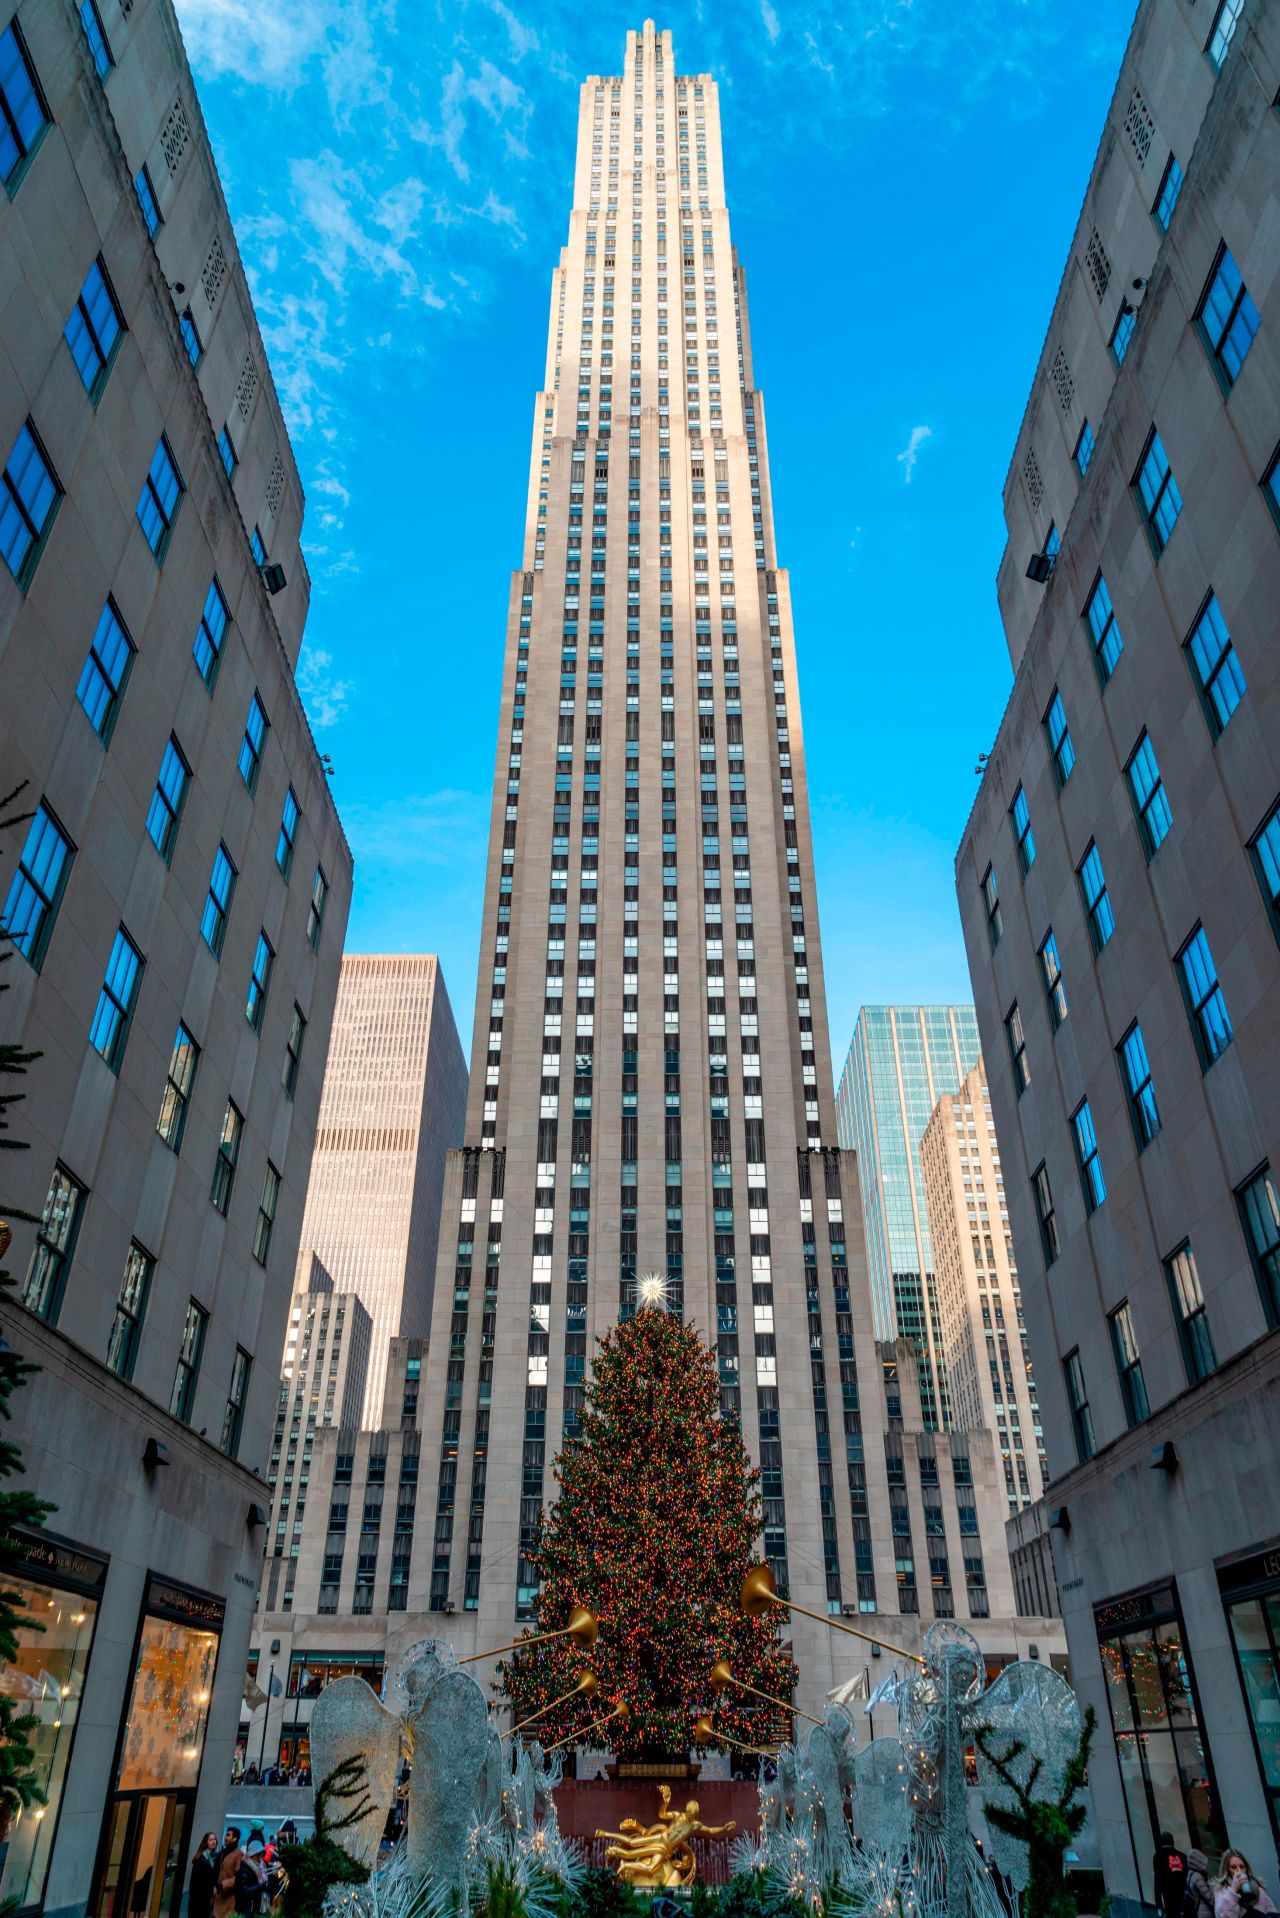 30 Rockefeller Plaza made quite an optimistic statement during the depths of the Great Depression.